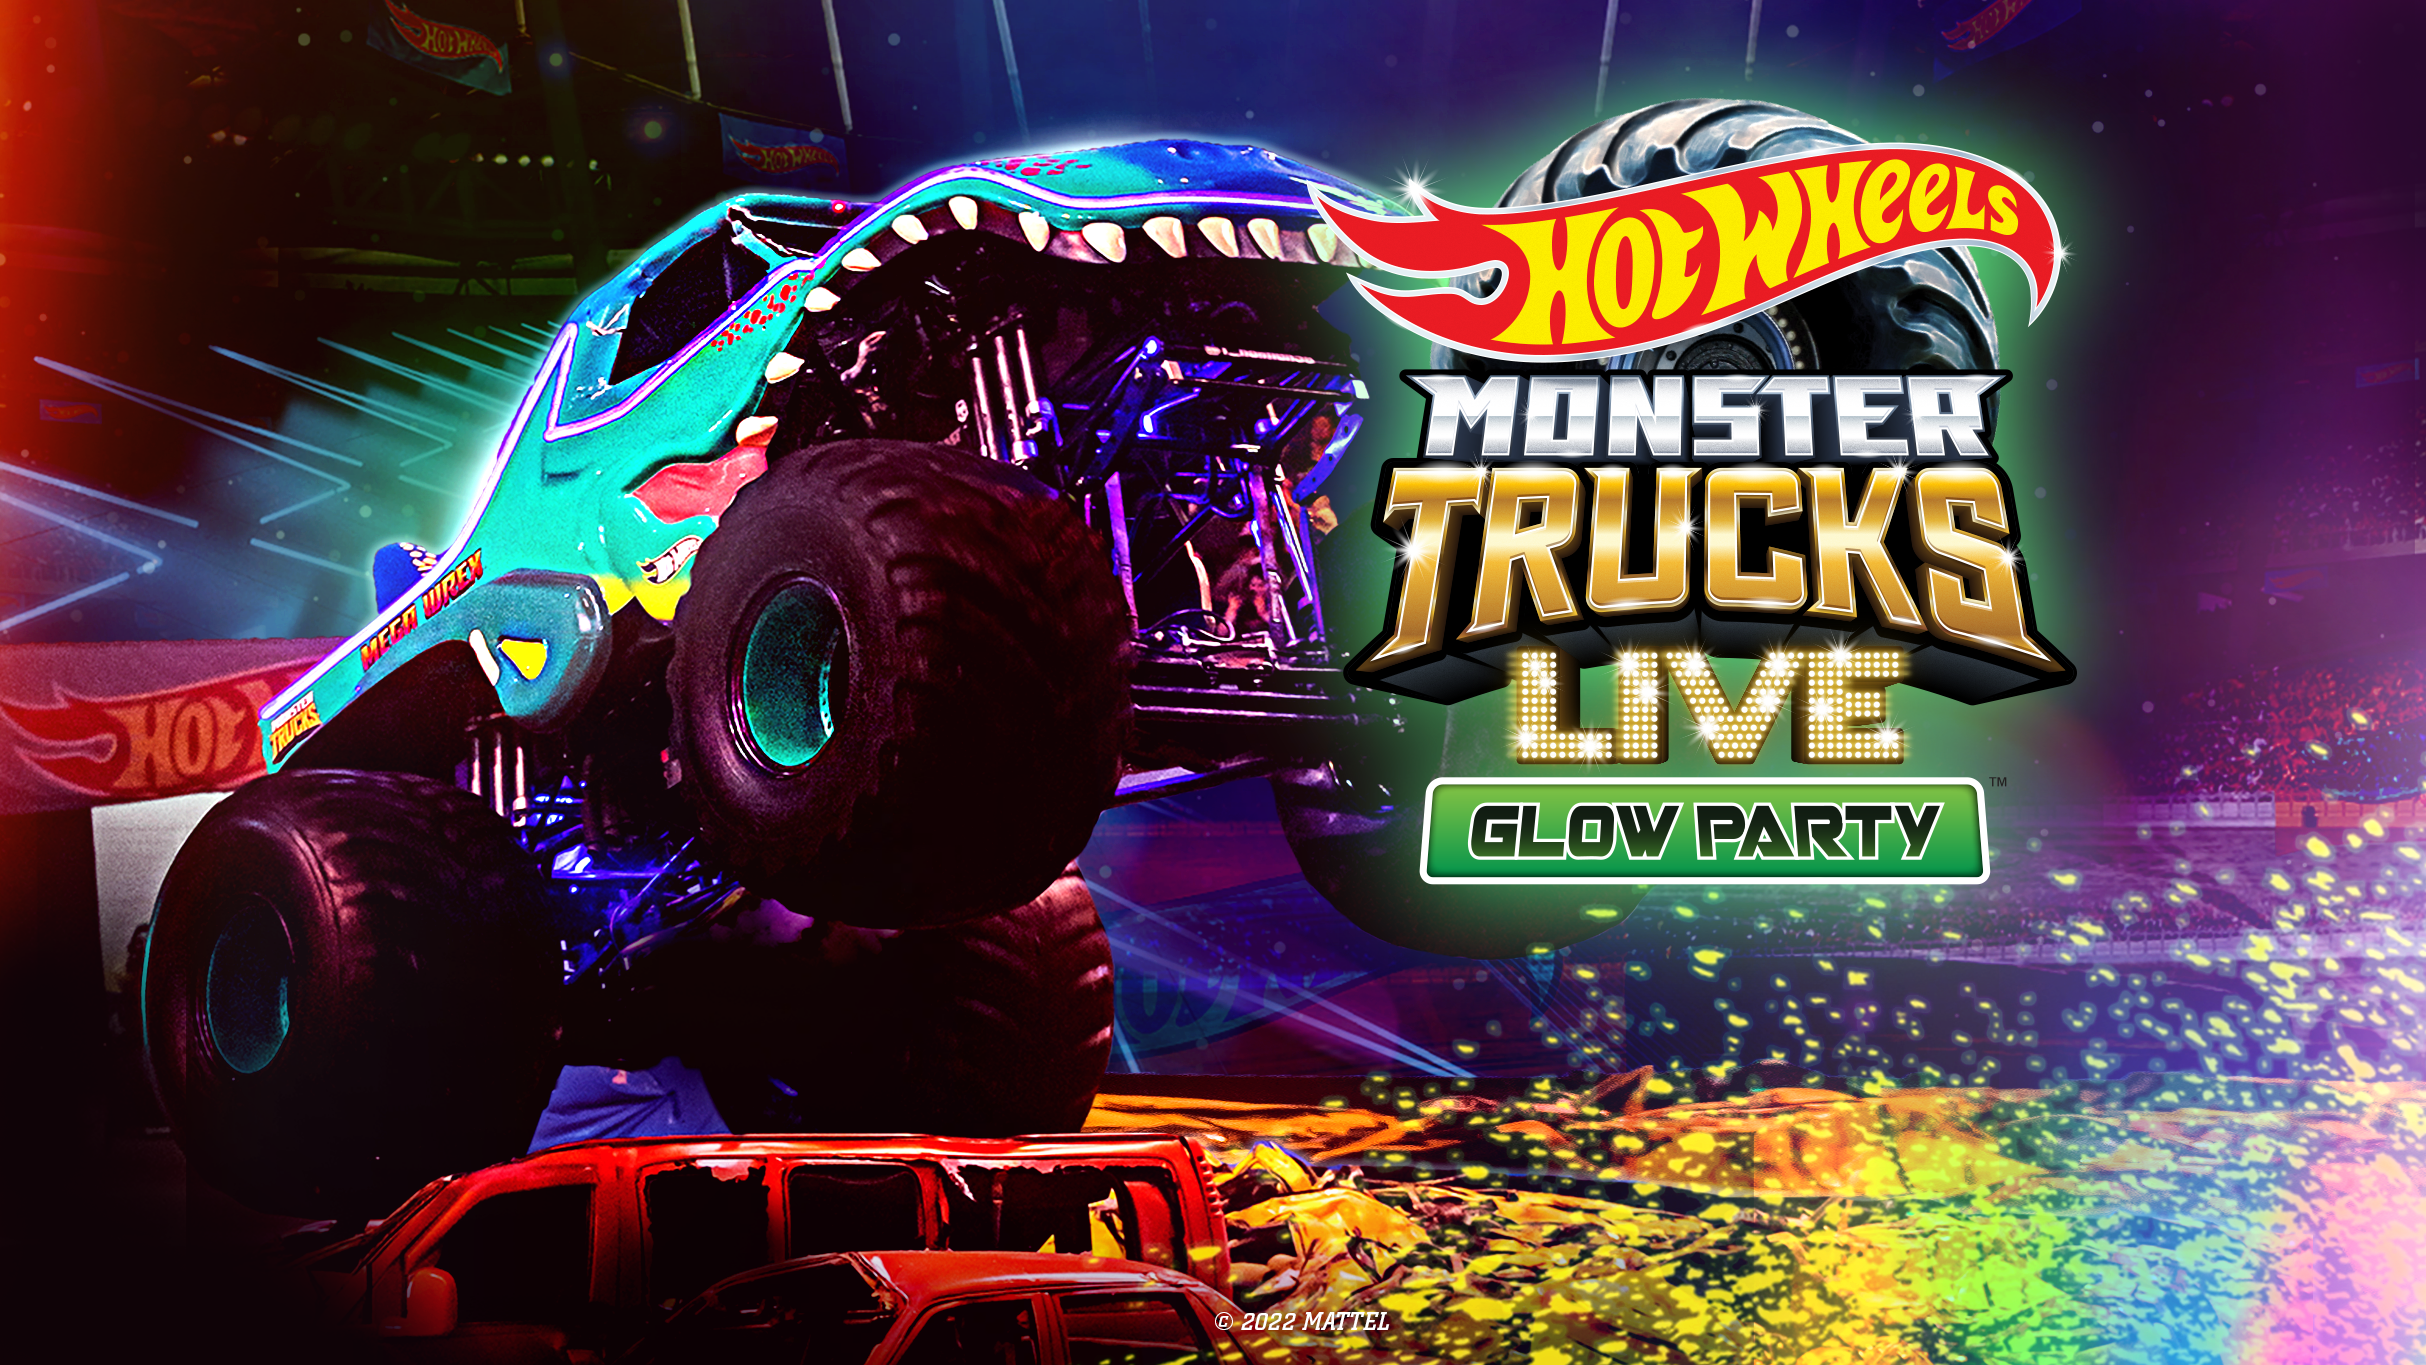 Hot Wheels Monster Trucks Live Glow Party at BMO Center